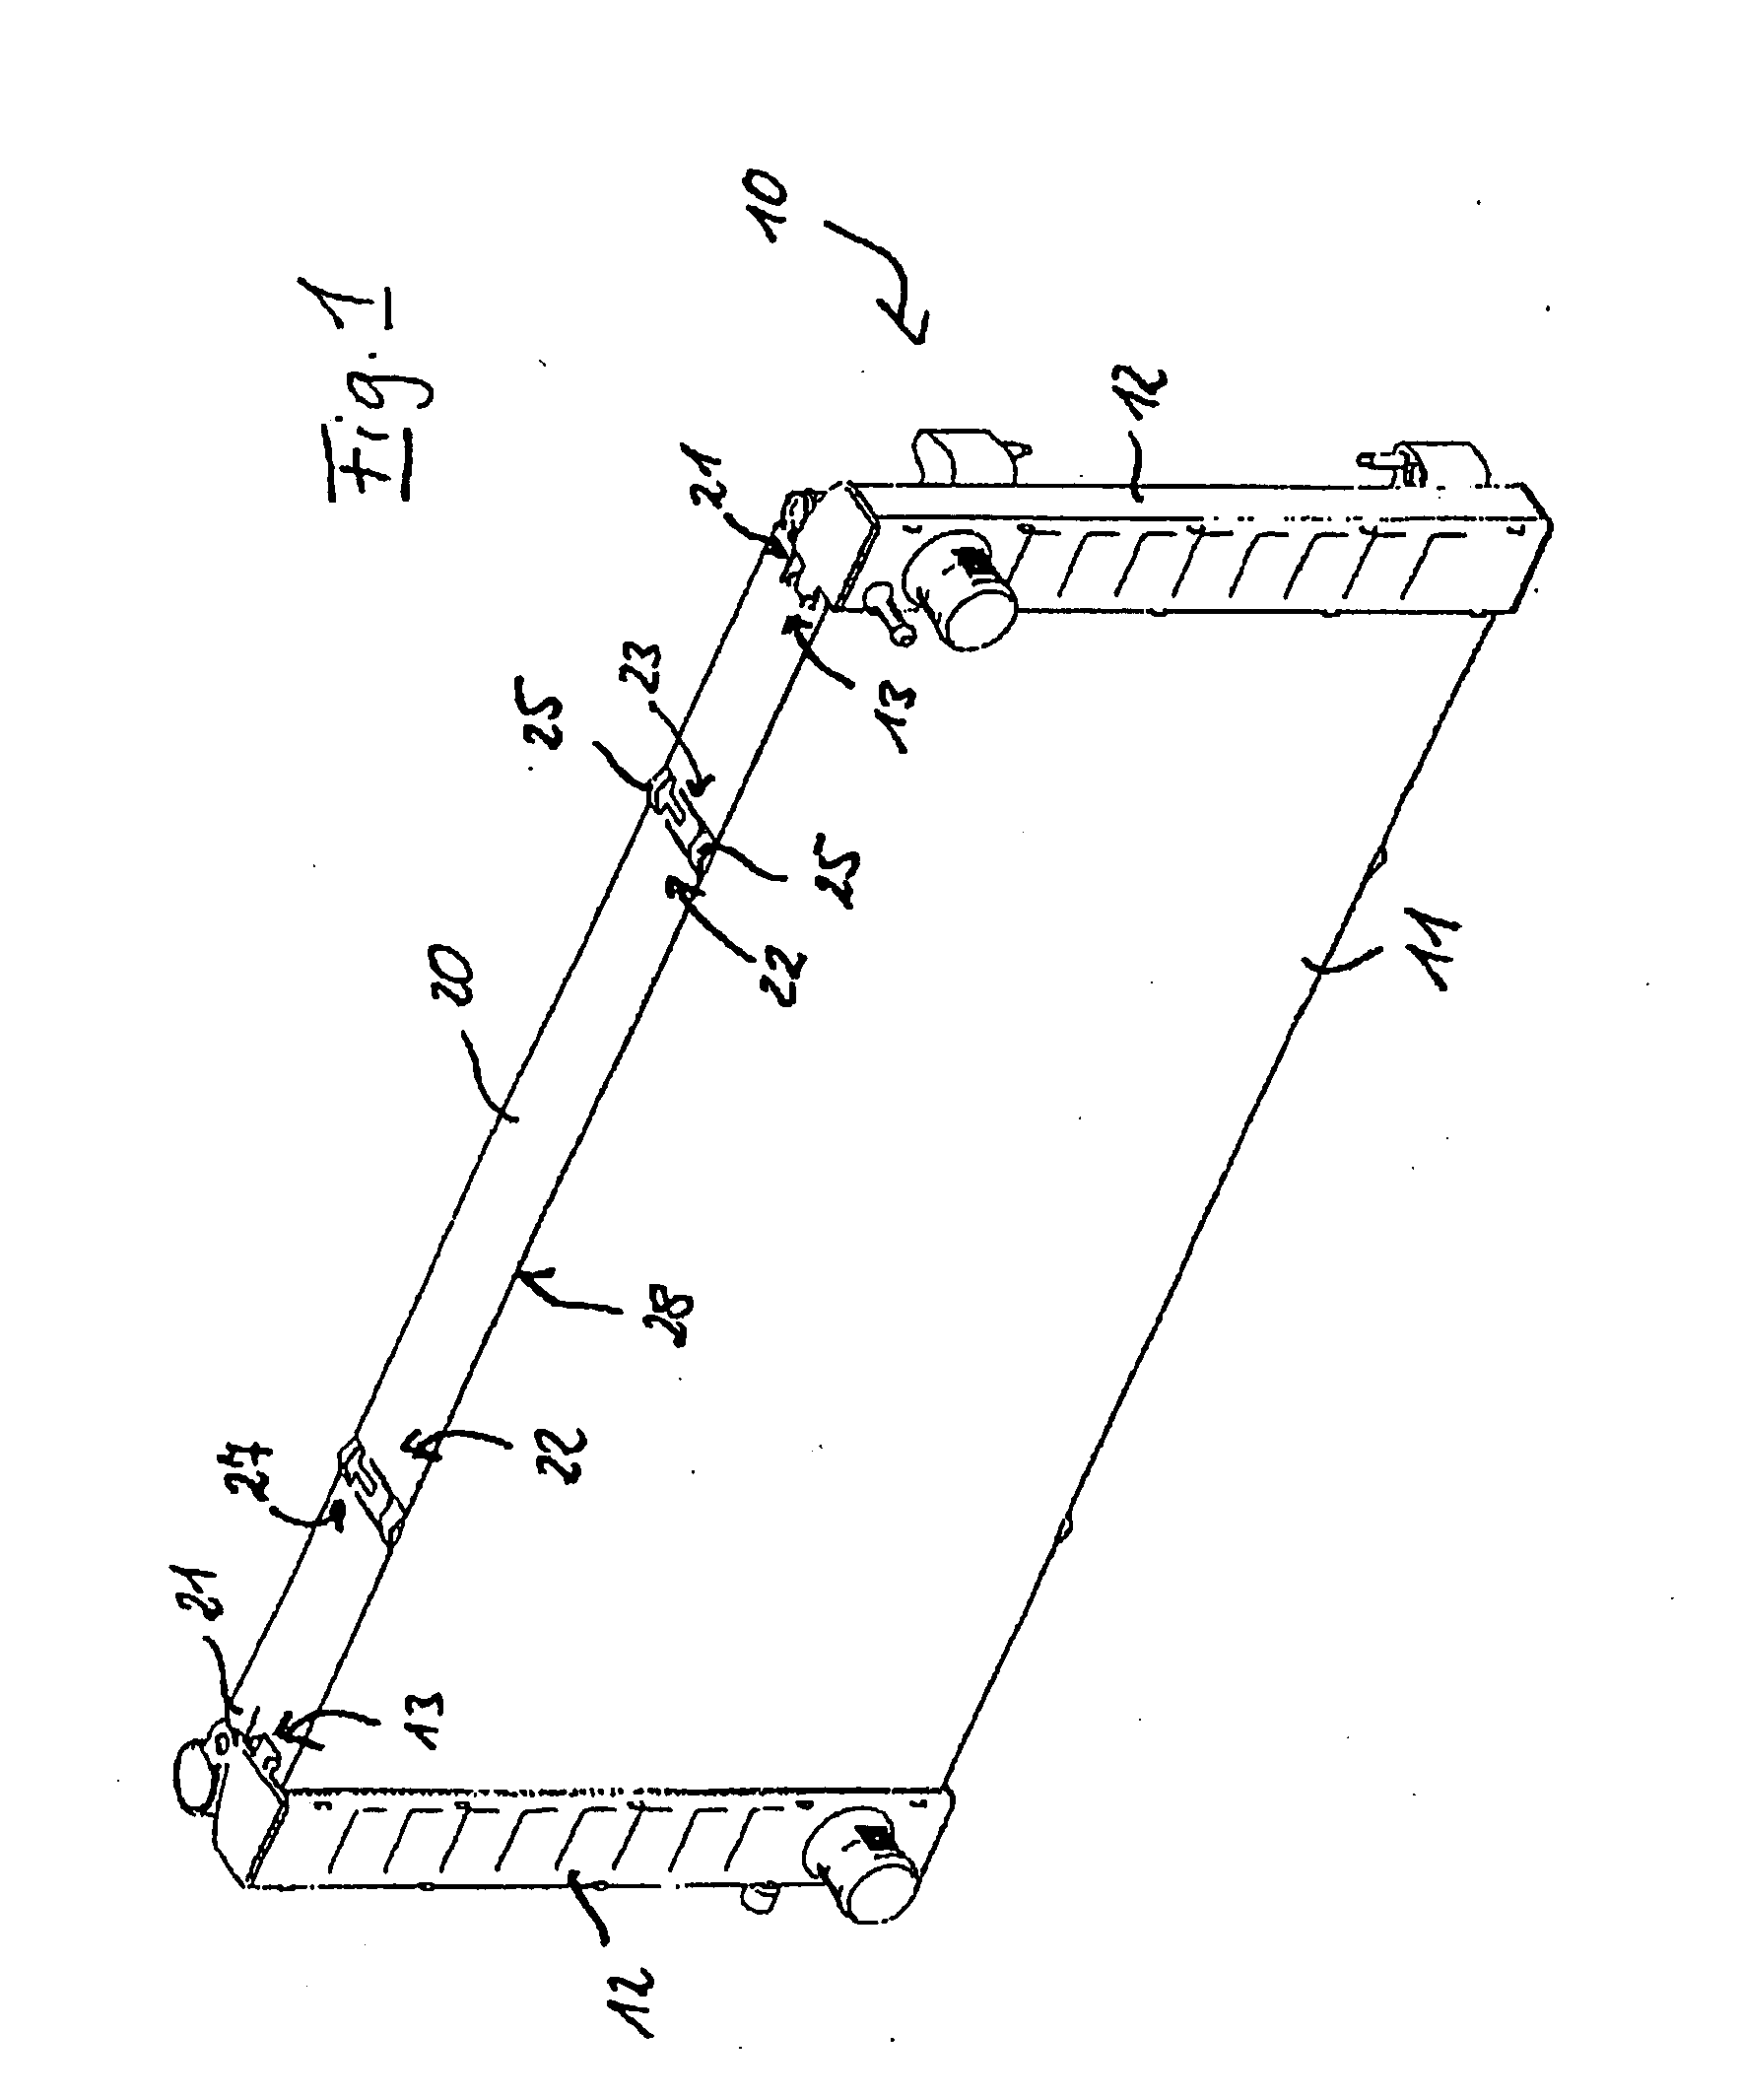 Metal Side-Plate for a Radiator